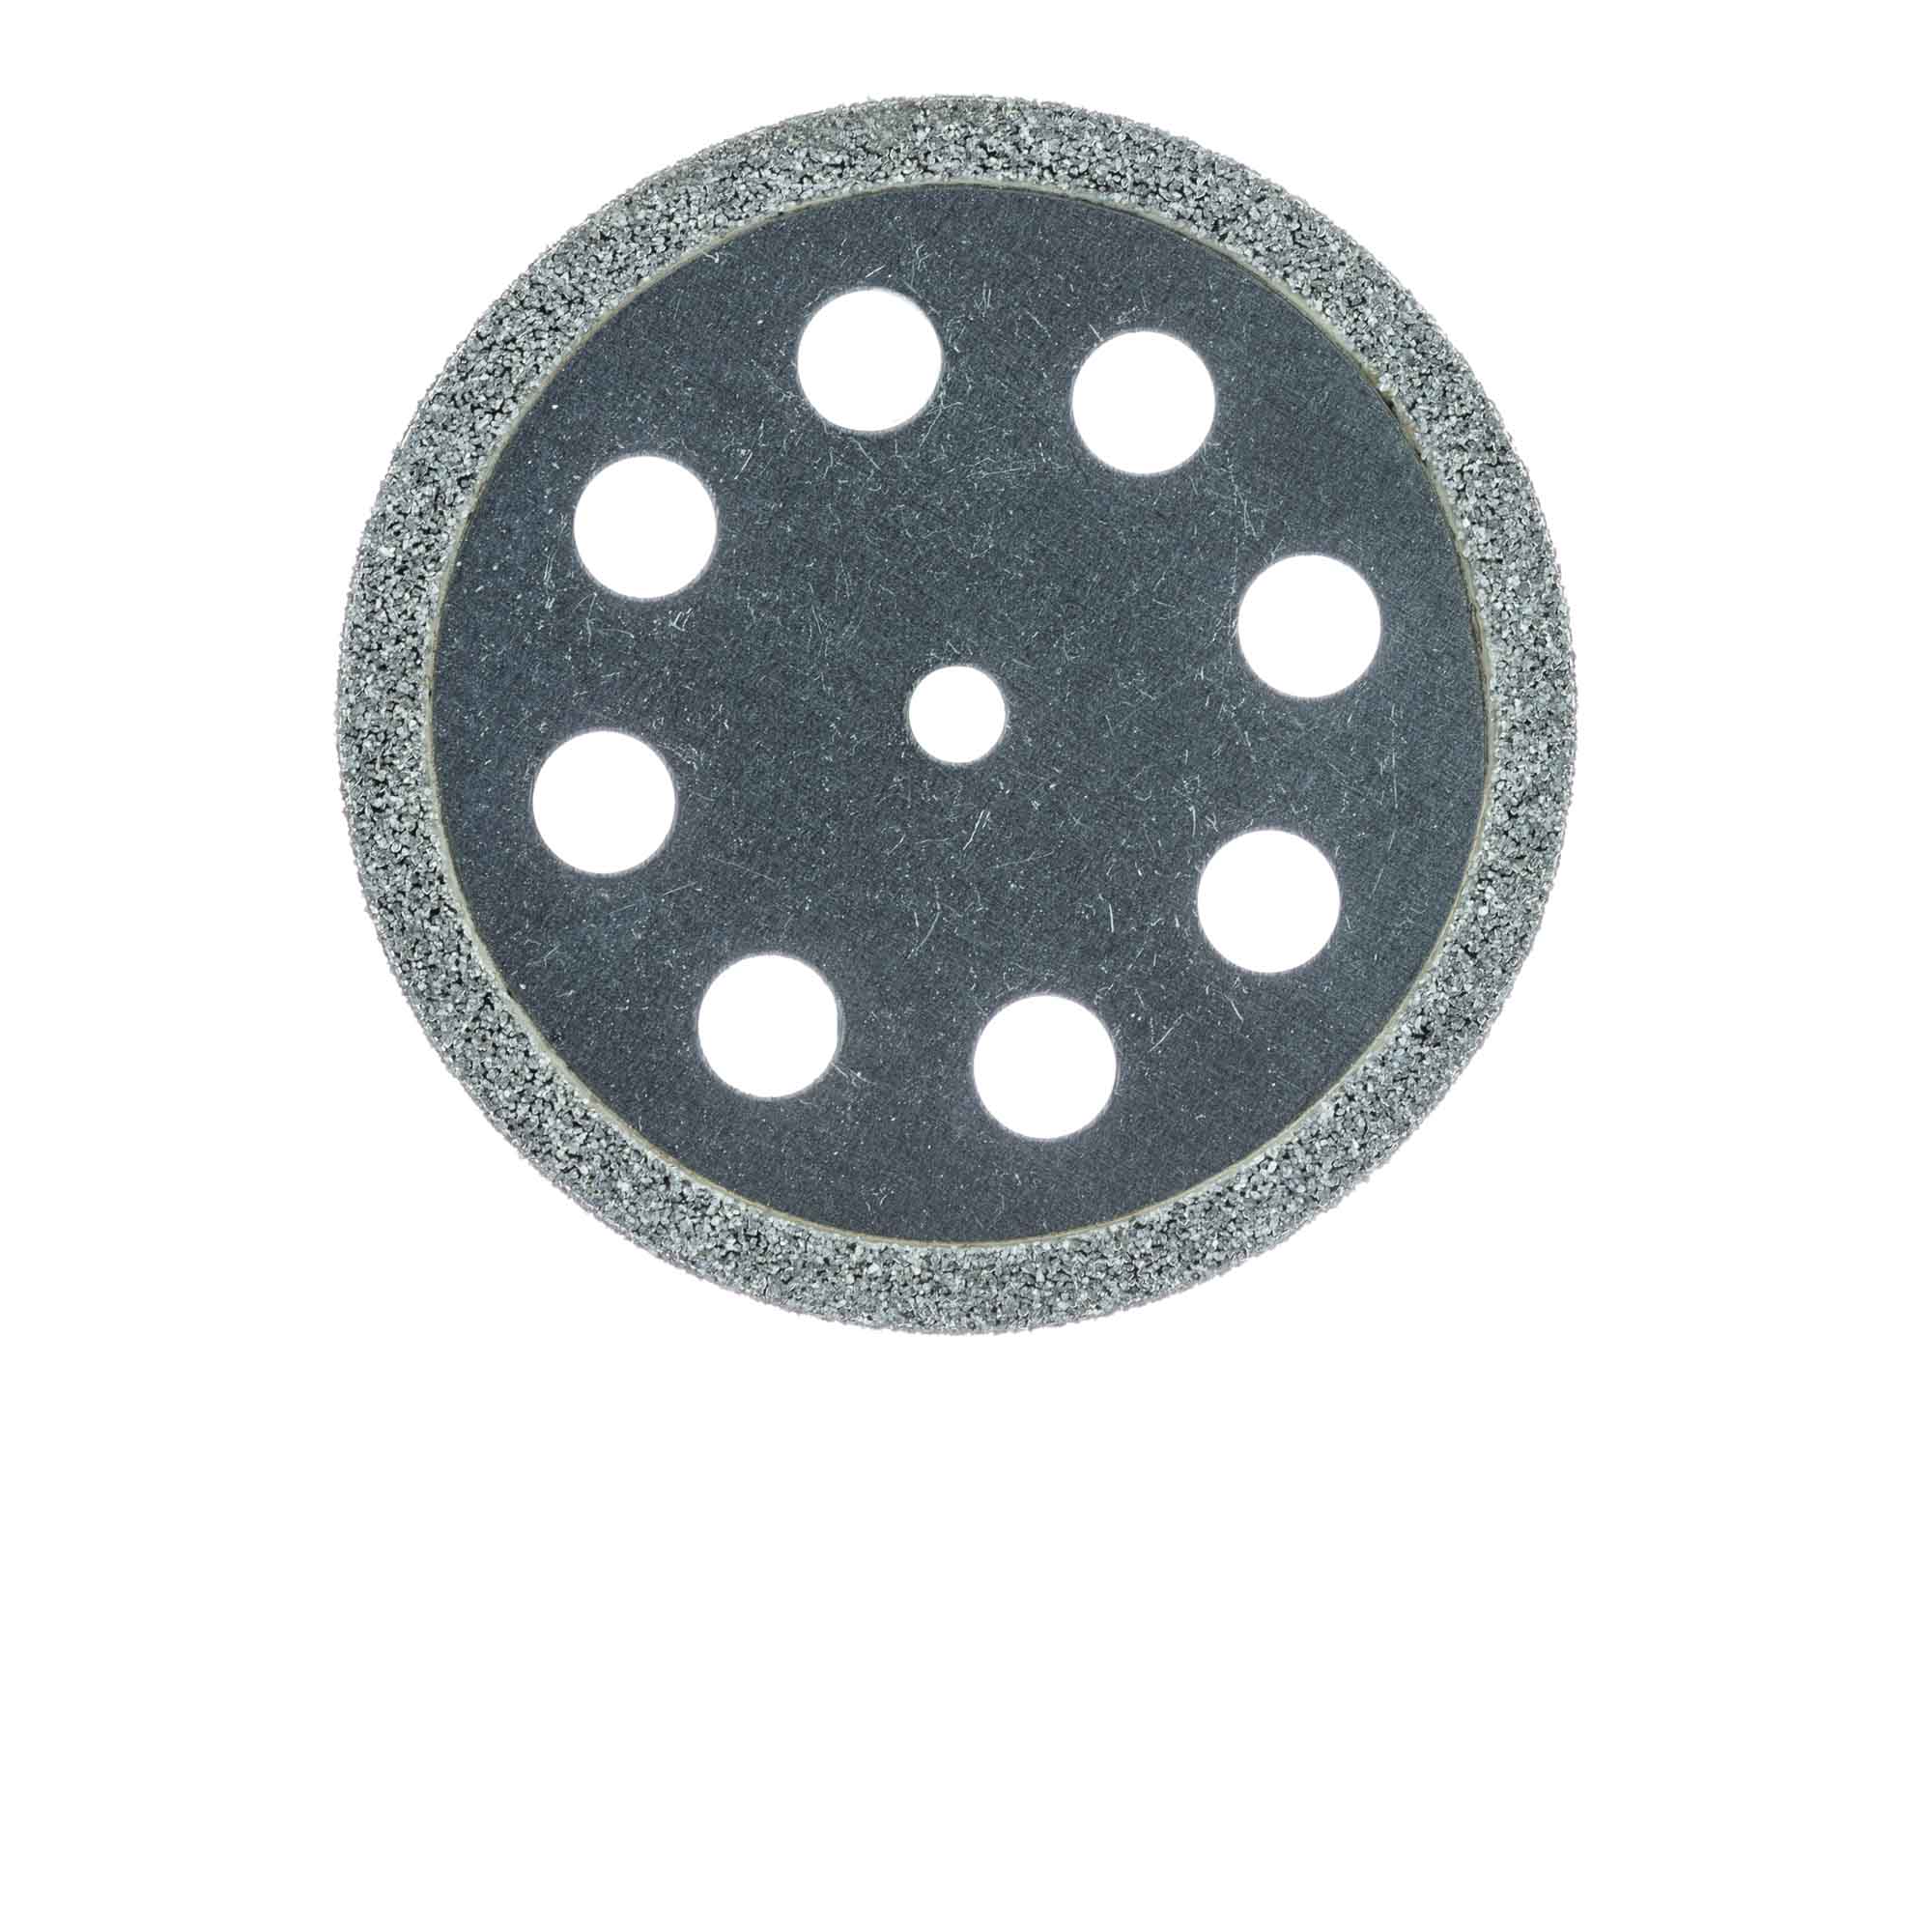 911D-220-HP Diamond Bur, Perforated Disc, Double Sided, 0.5mm thick, 22mm Diameter, HP